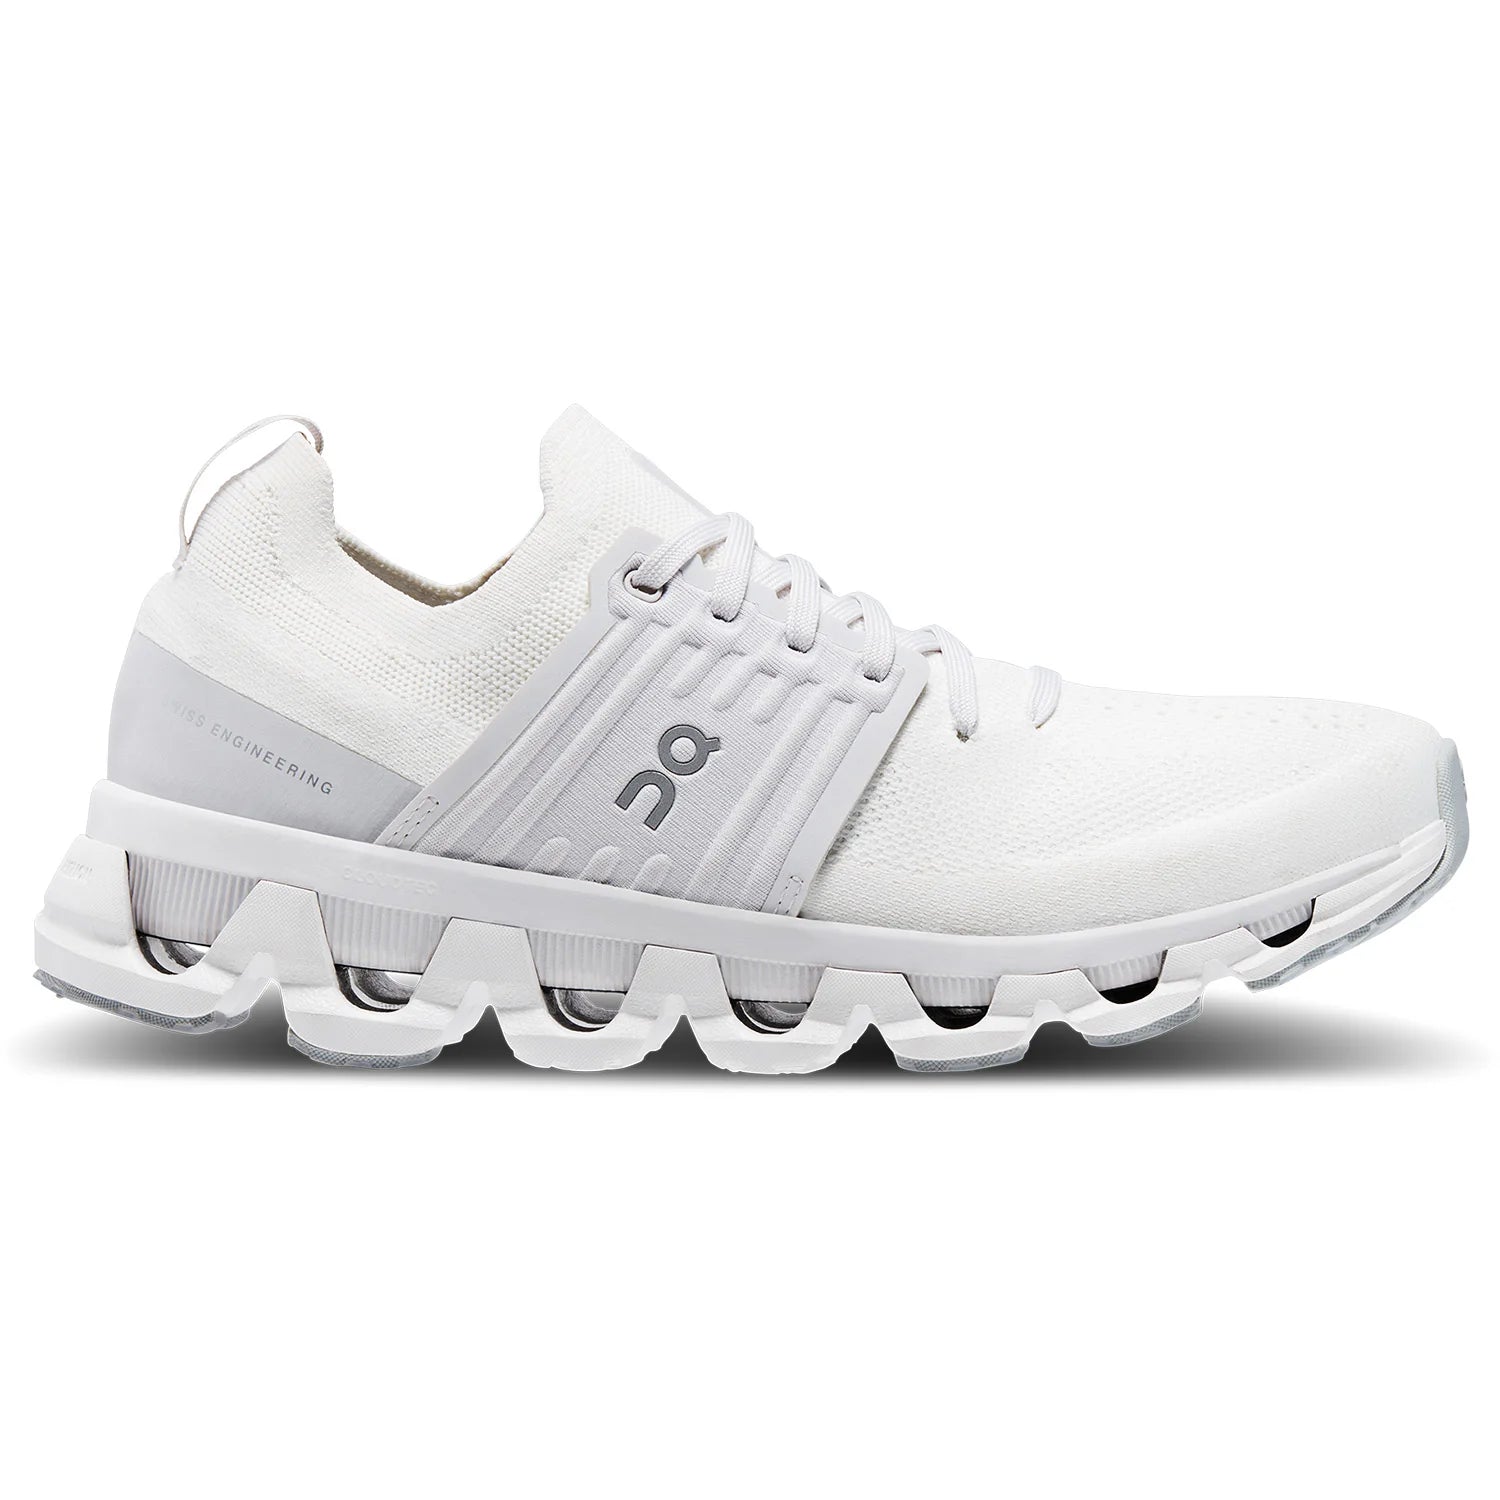 Lateral view of the Women's ON Cloudswift 3 in all white